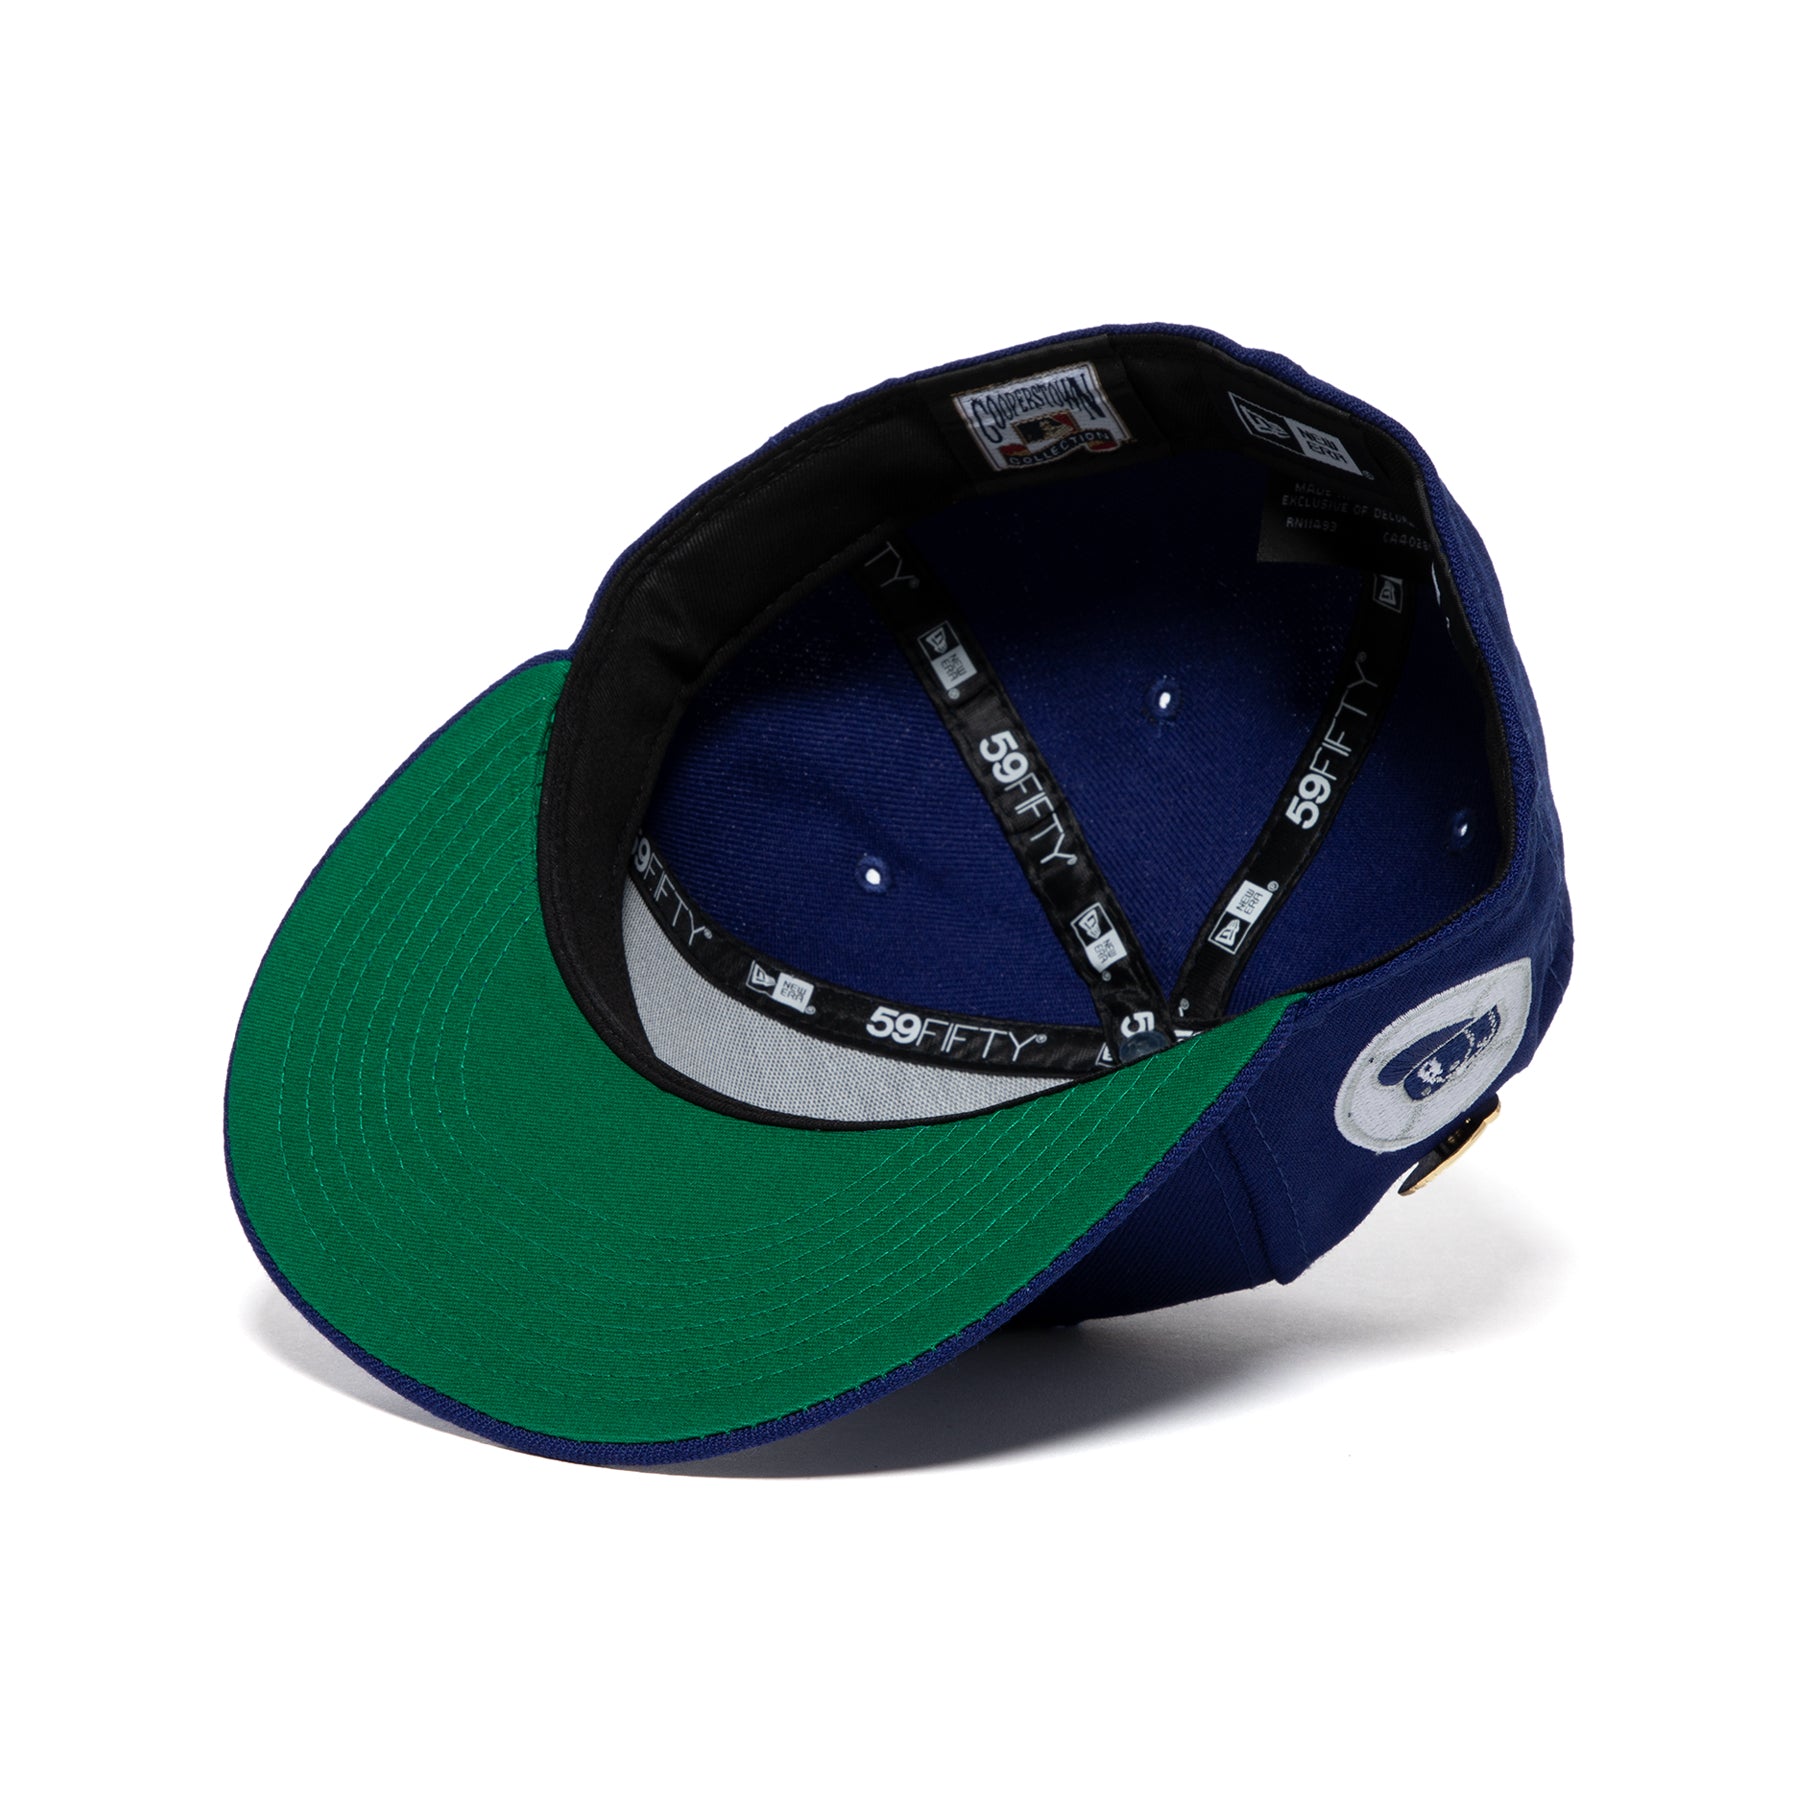 New Era Brooklyn Dodgers First World Championship 1955 Two Tone Edition  59Fifty Fitted Hat, DROPS